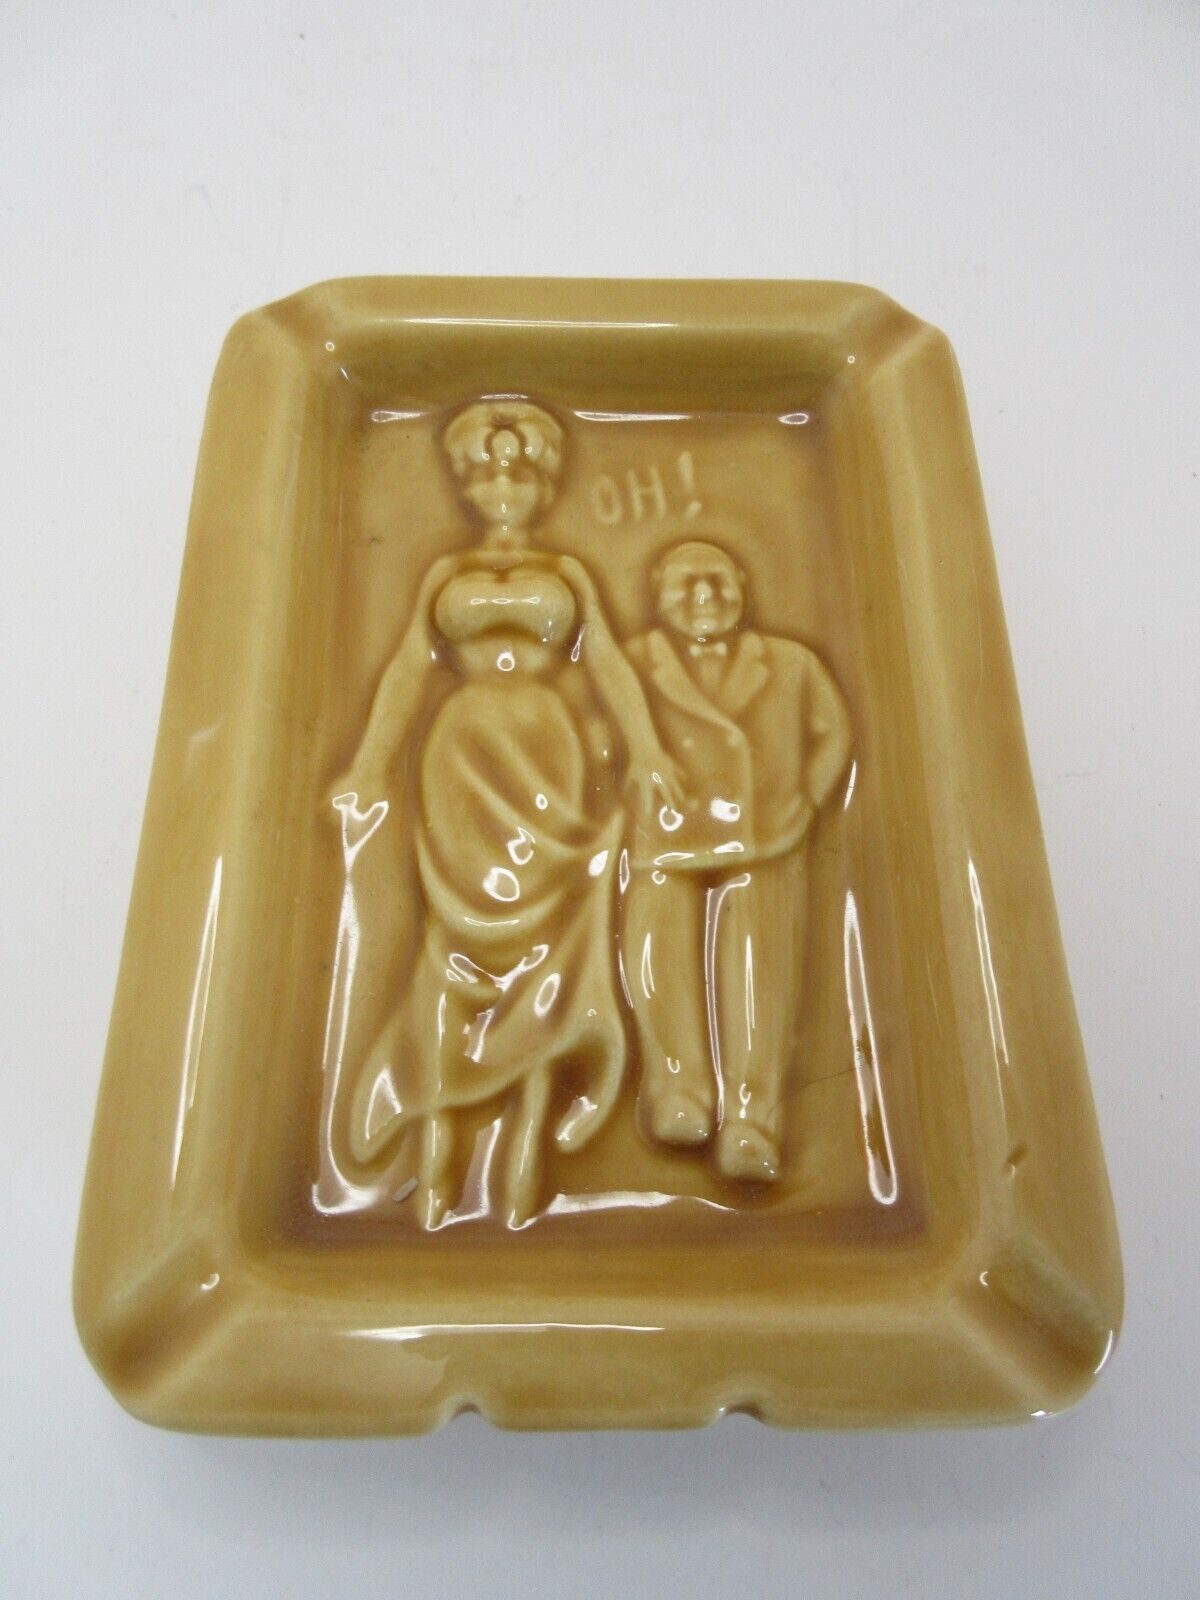 Old Vintage Risque Naughty Ceramic Pottery Ashtray Man & Woman